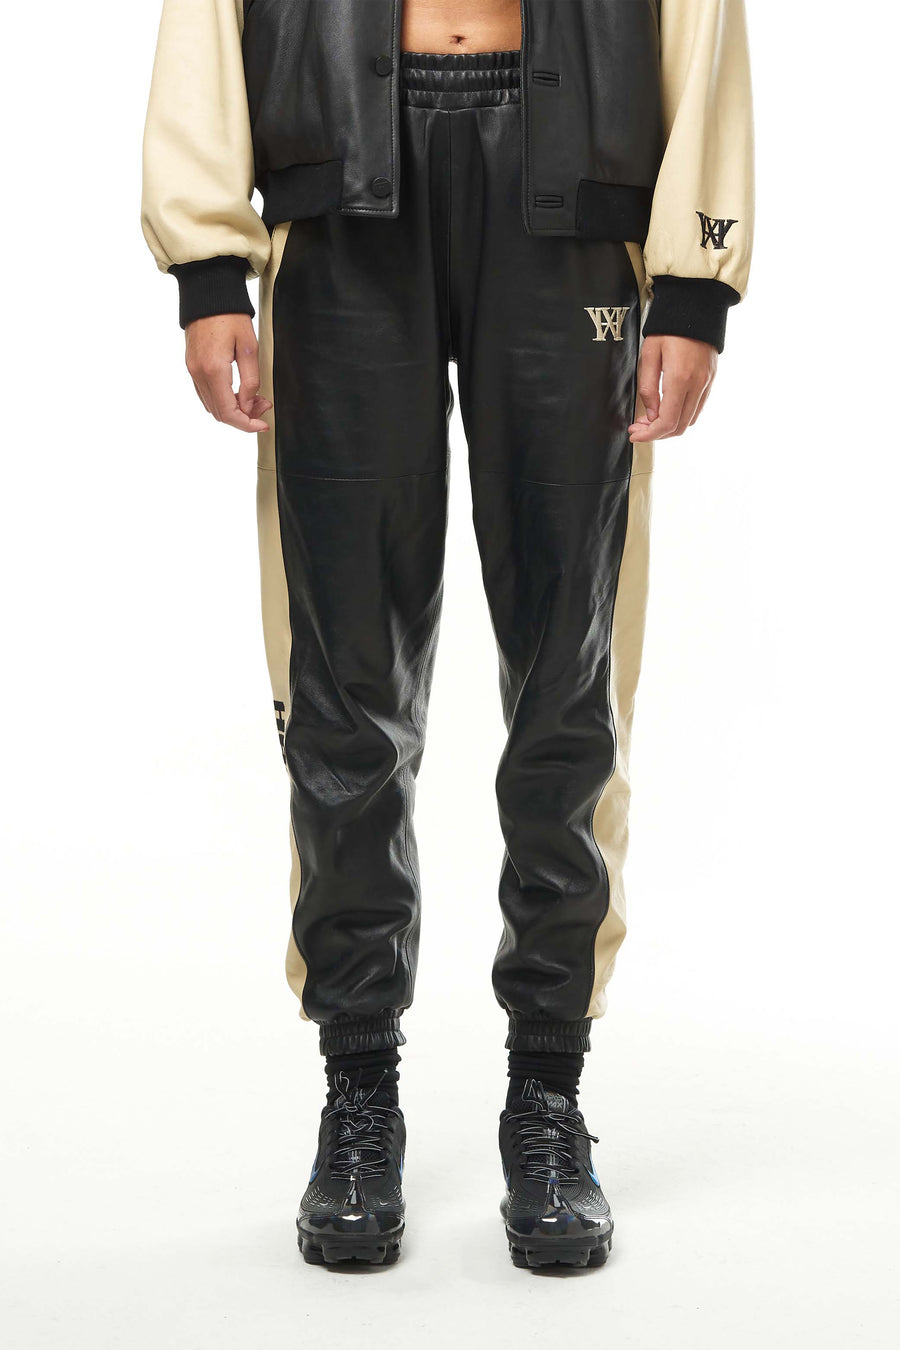 THE VIRALIZER UNISEX LEATHER TRACKSUIT BOTTOMS IN BLACK AND CREAM